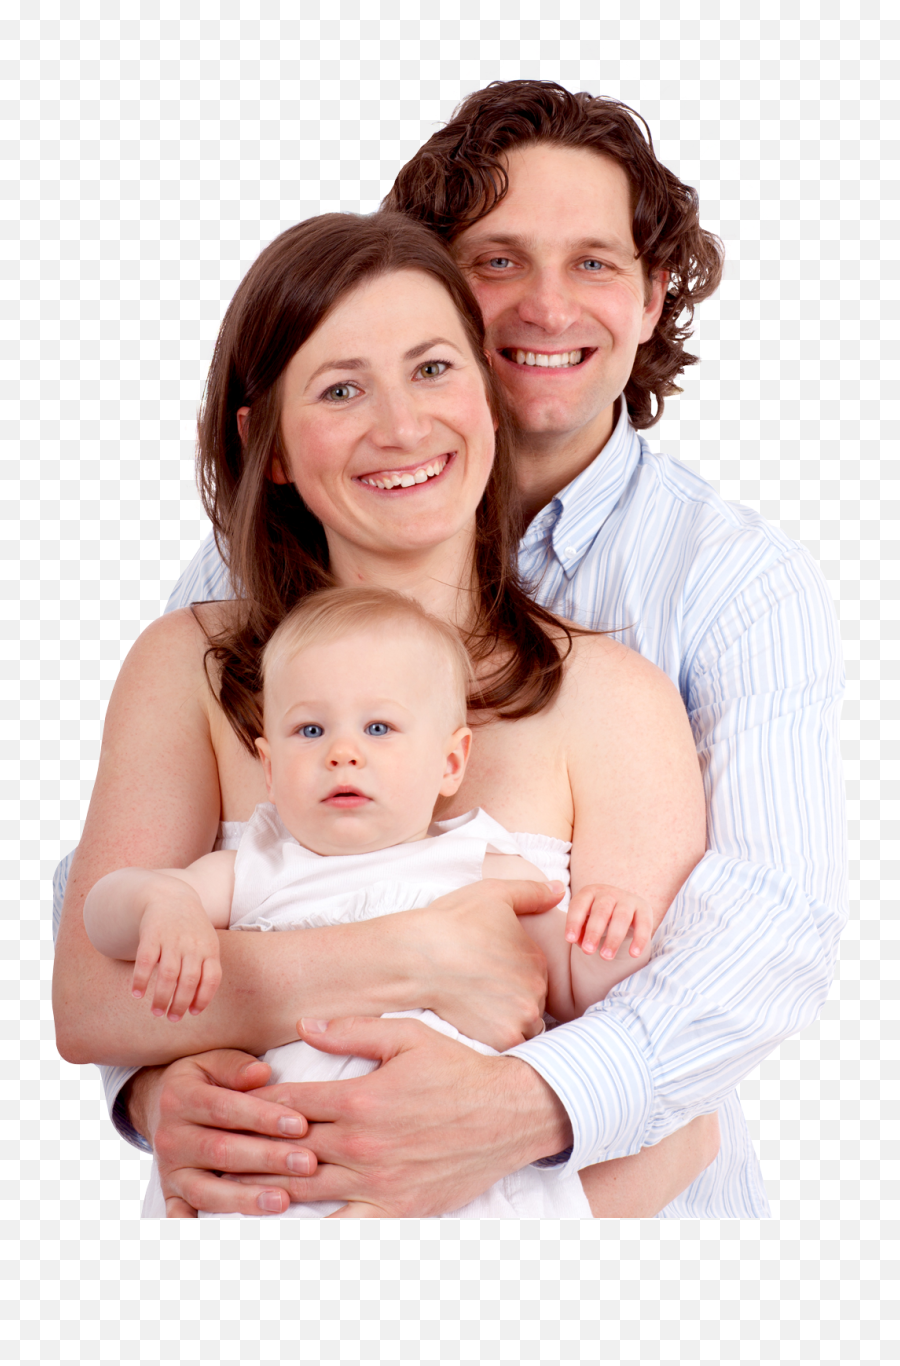 Couple With Baby Png Image - Pngpix Couple And A Baby,Infant Png